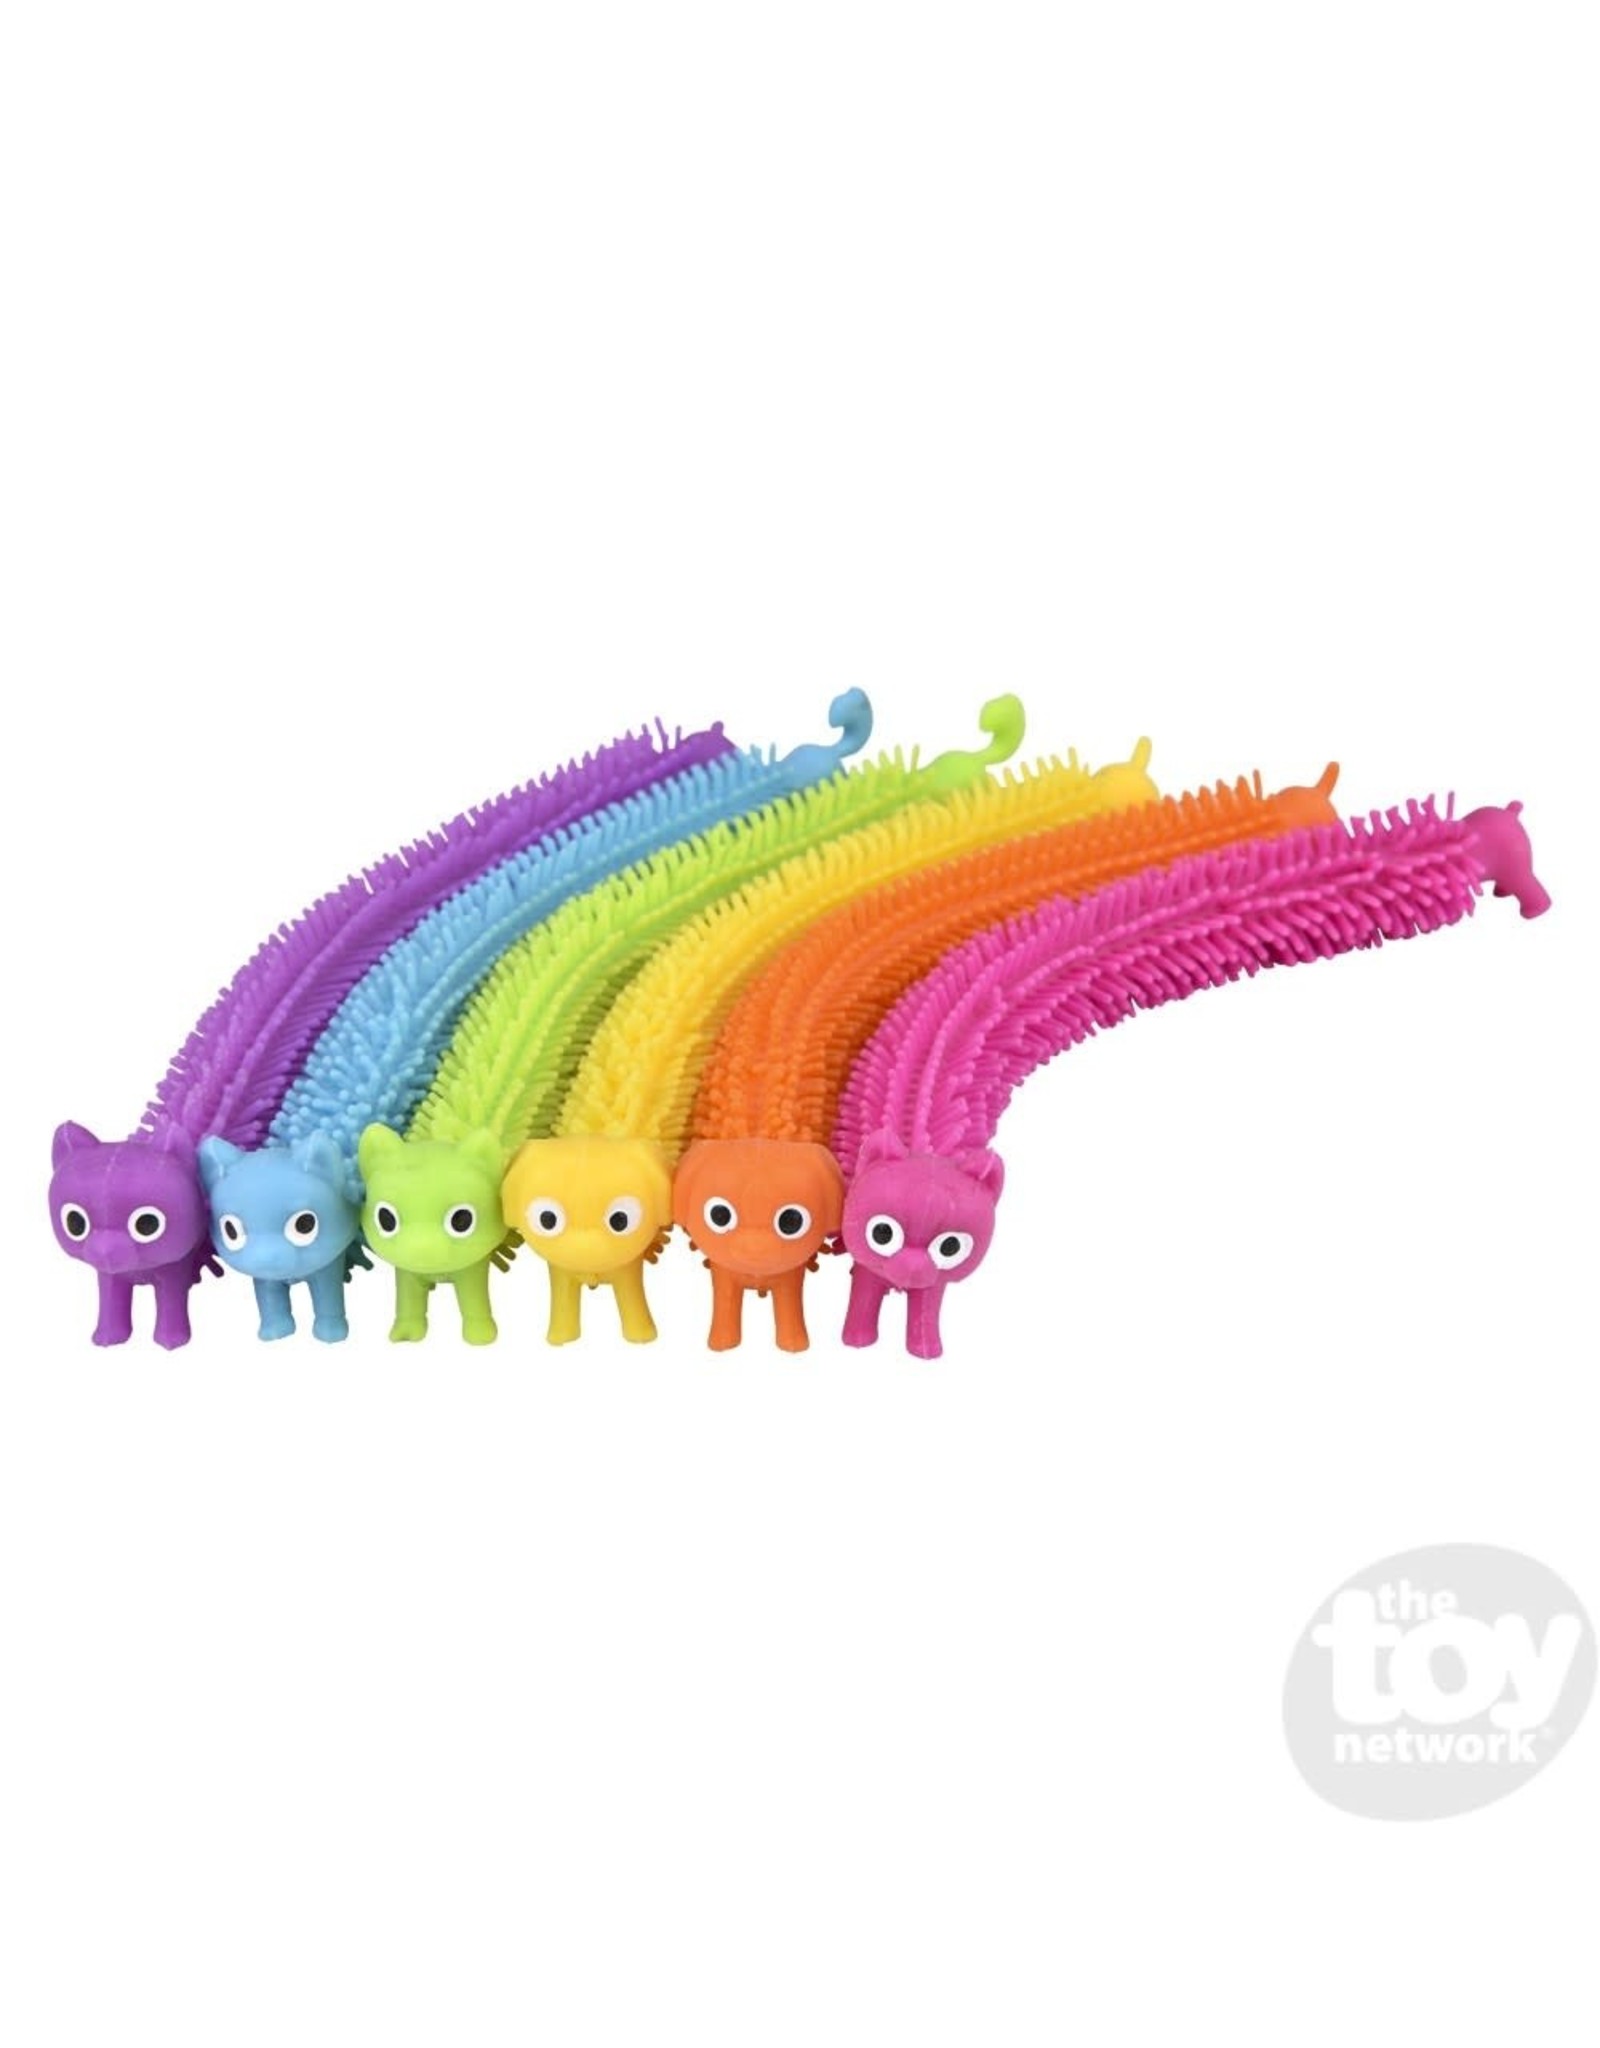 The Toy Network 7.25" Dog Stretchy String